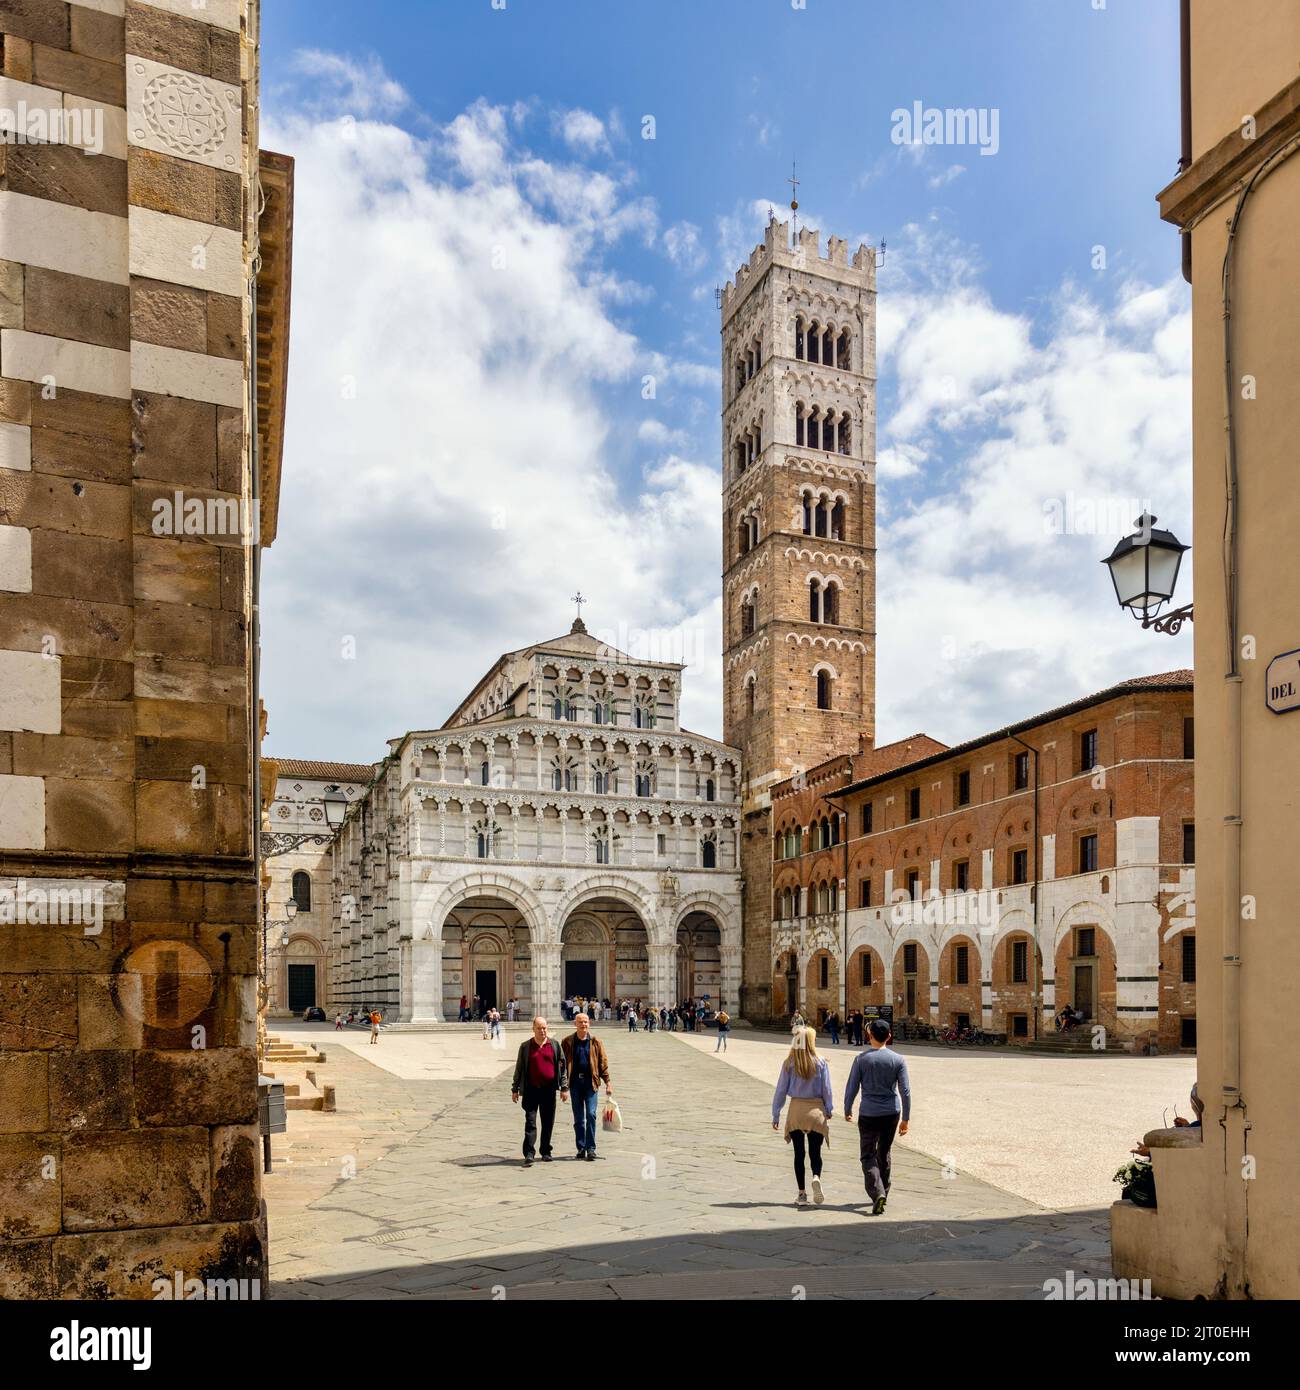 Duomo San Martino.  St. Martin's cathedral.  Lucca, Lucca Province, Tuscany, Italy.  The city's cathedral dates from the 9th century but rebuilding fr Stock Photo